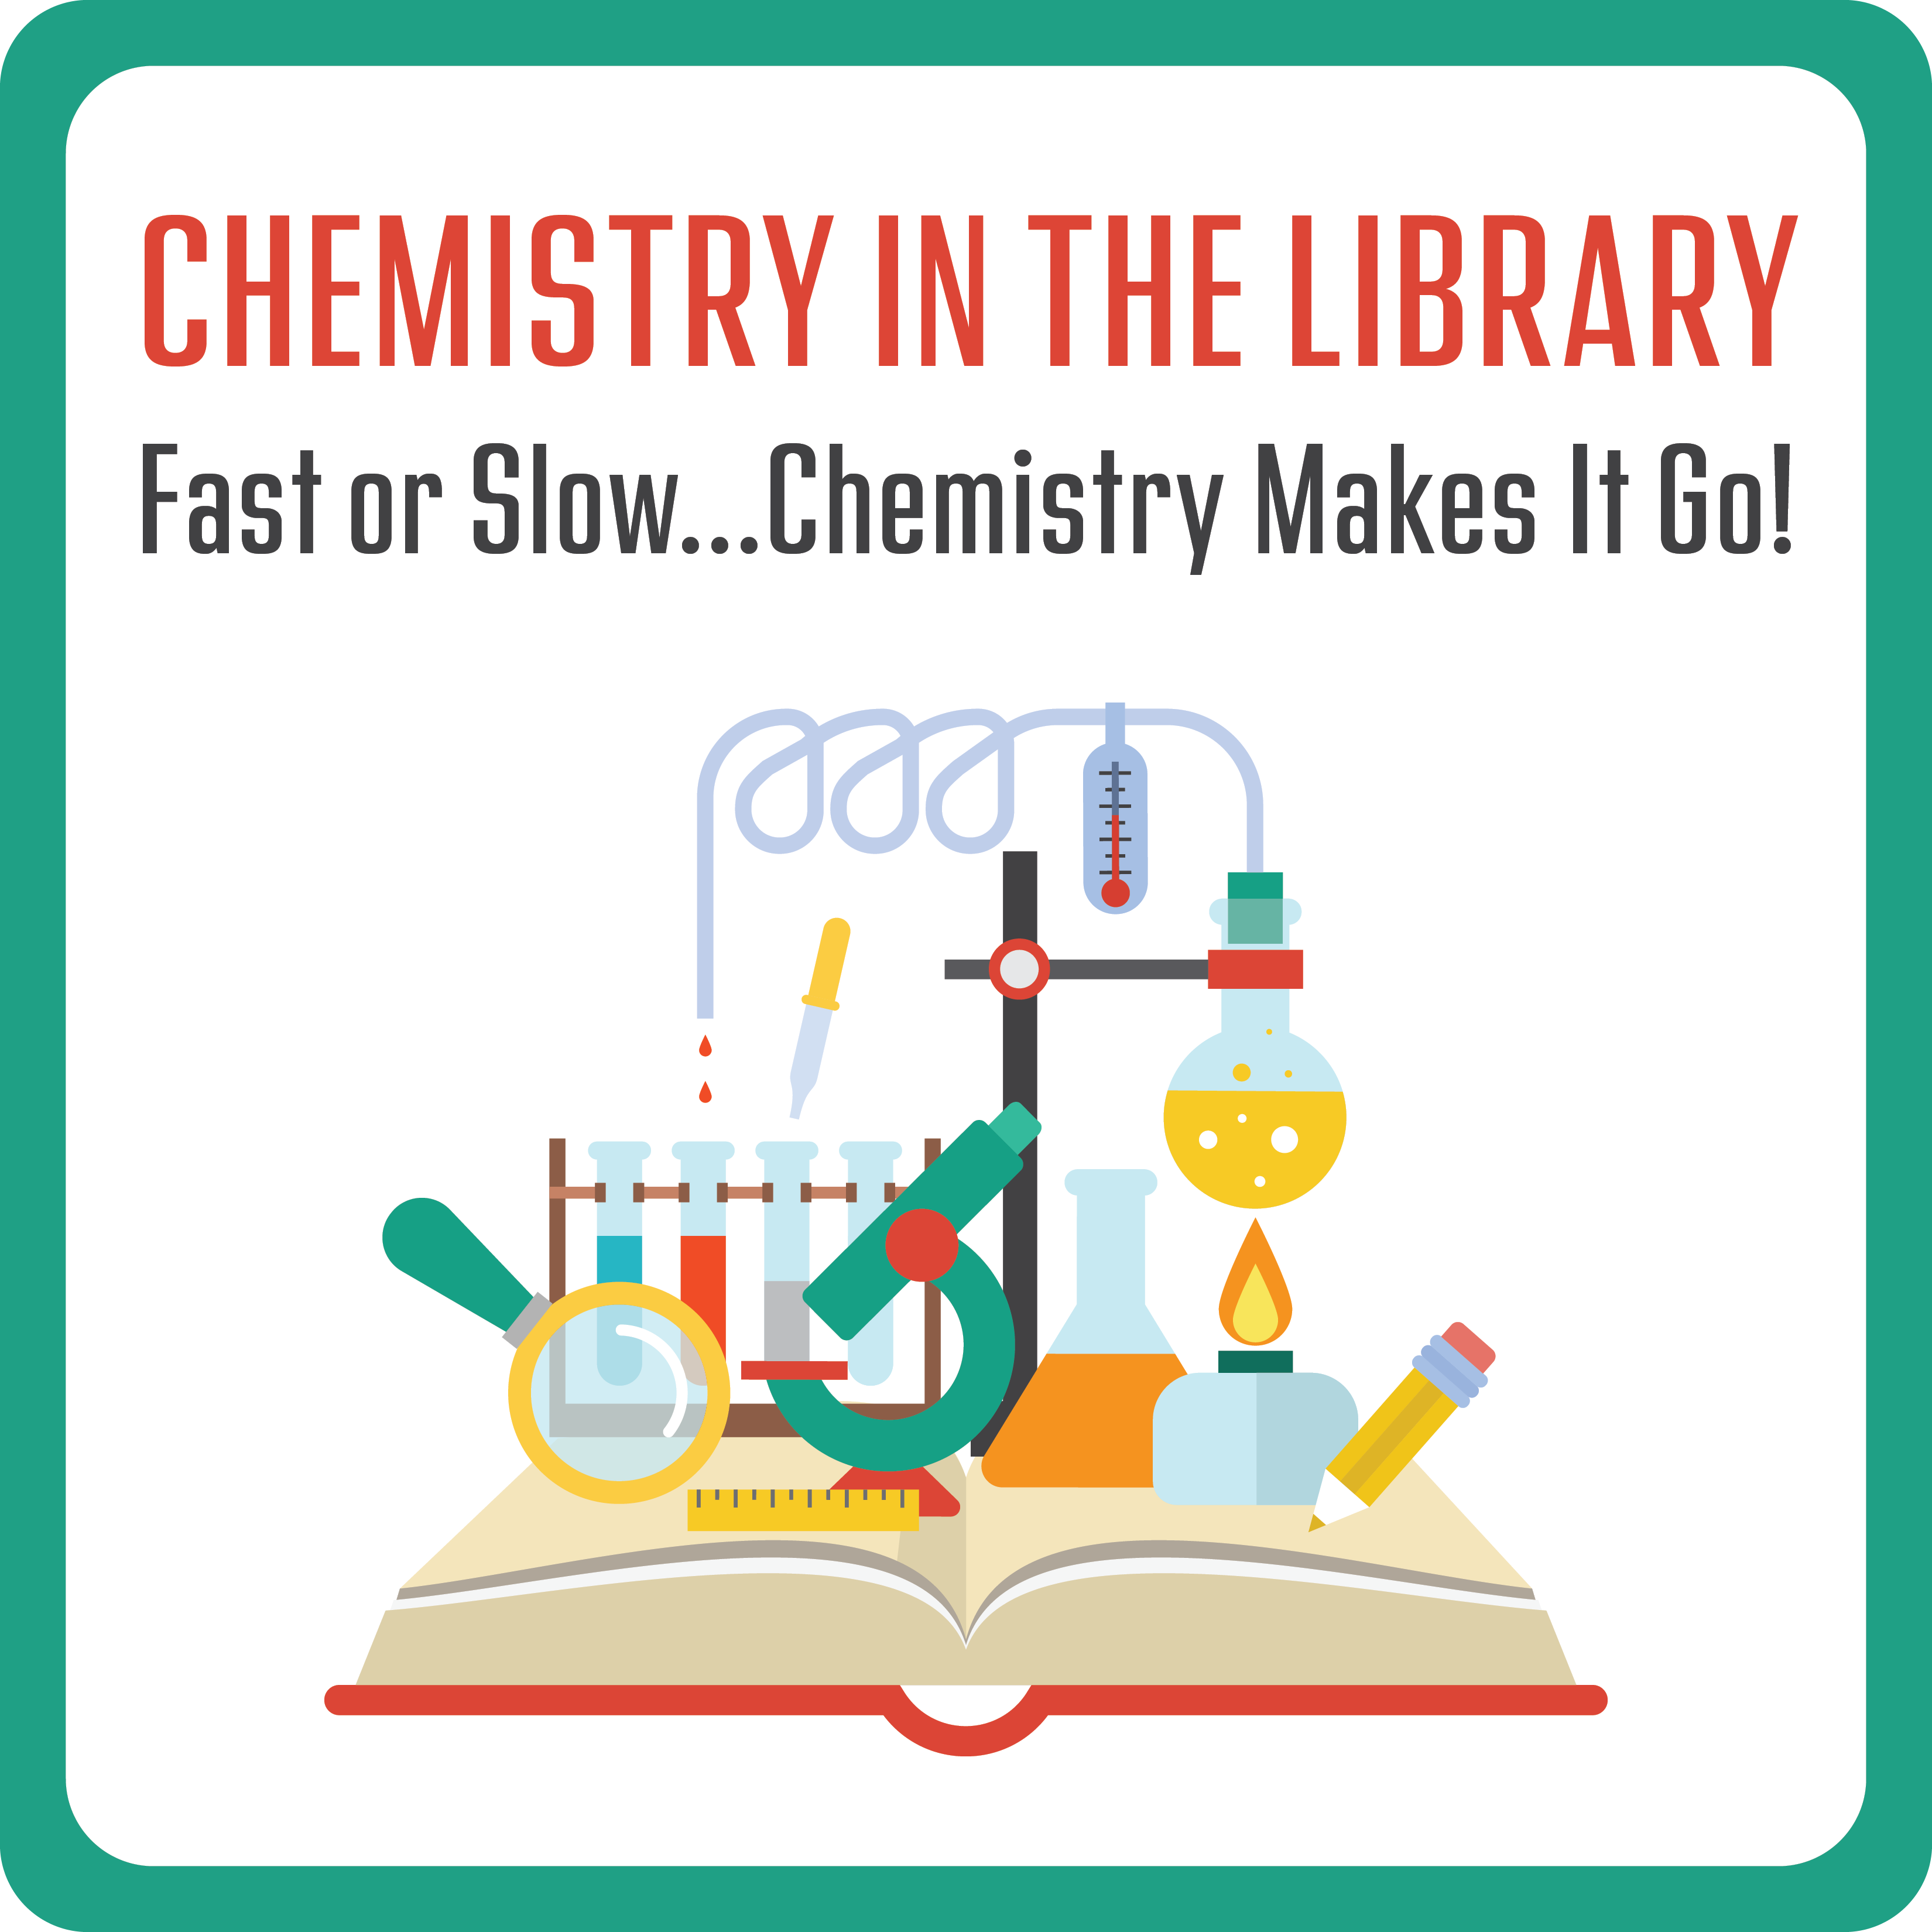  Chemistry in the Library: Fast or Slow...Chemistry Makes It Go!